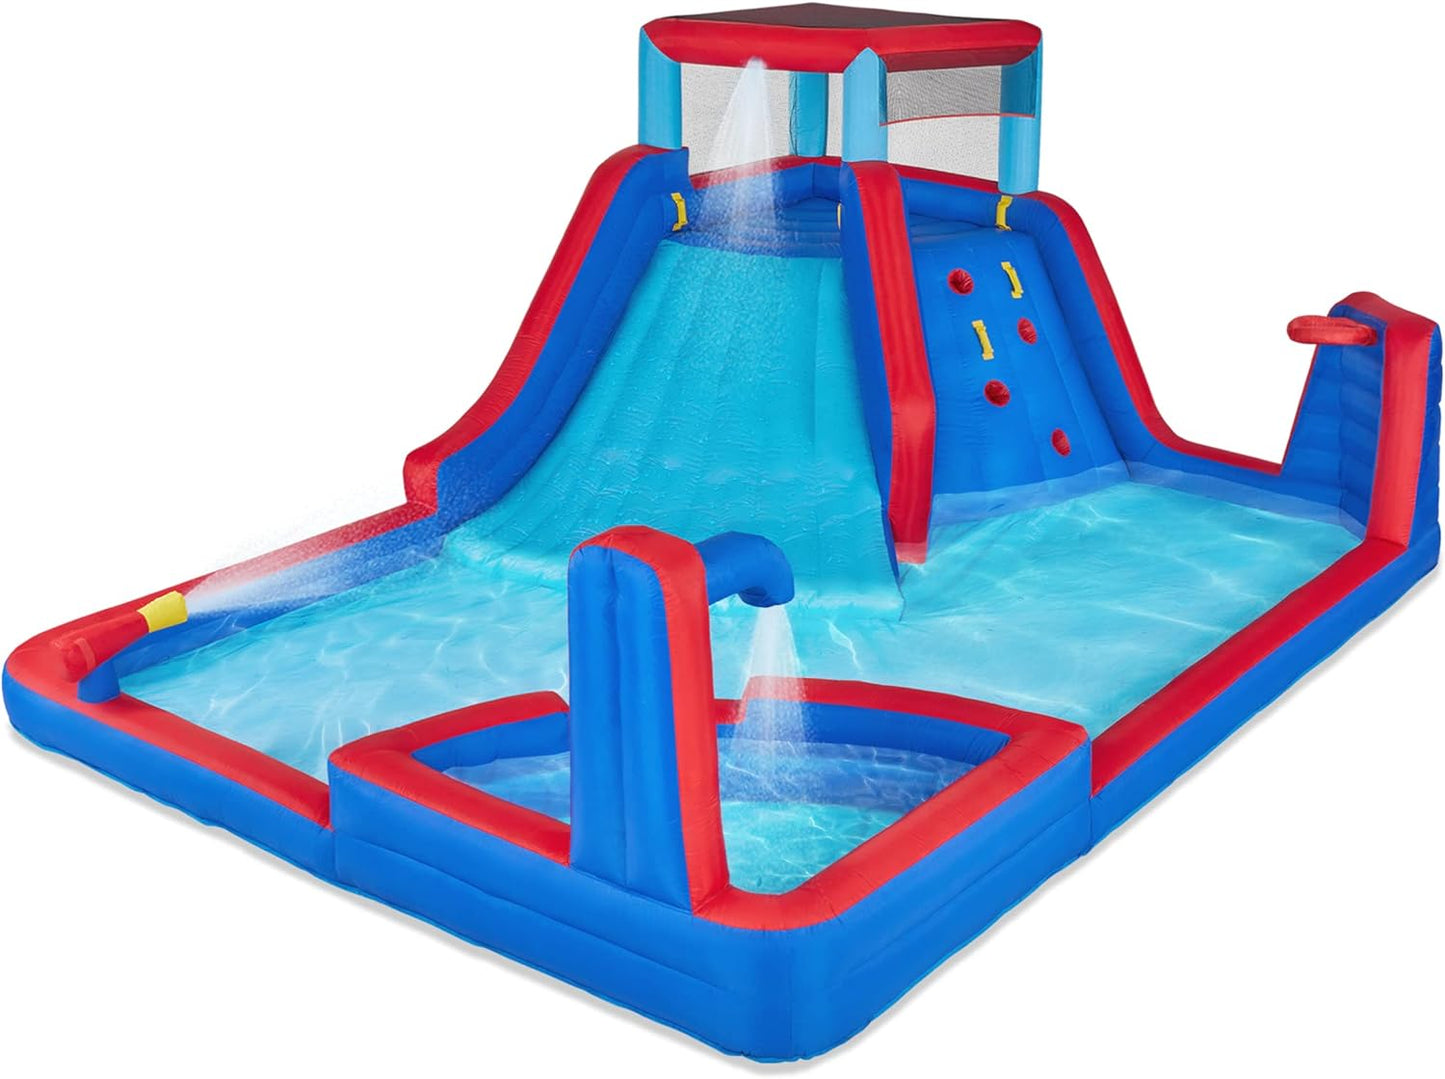 Four Corner Inflatable Water Slide Park – Heavy-Duty for Outdoor Fun - Climbing Wall, Slide & Deep Pool – Easy to Set up & Inflate with Included Air Pump & Carrying Case